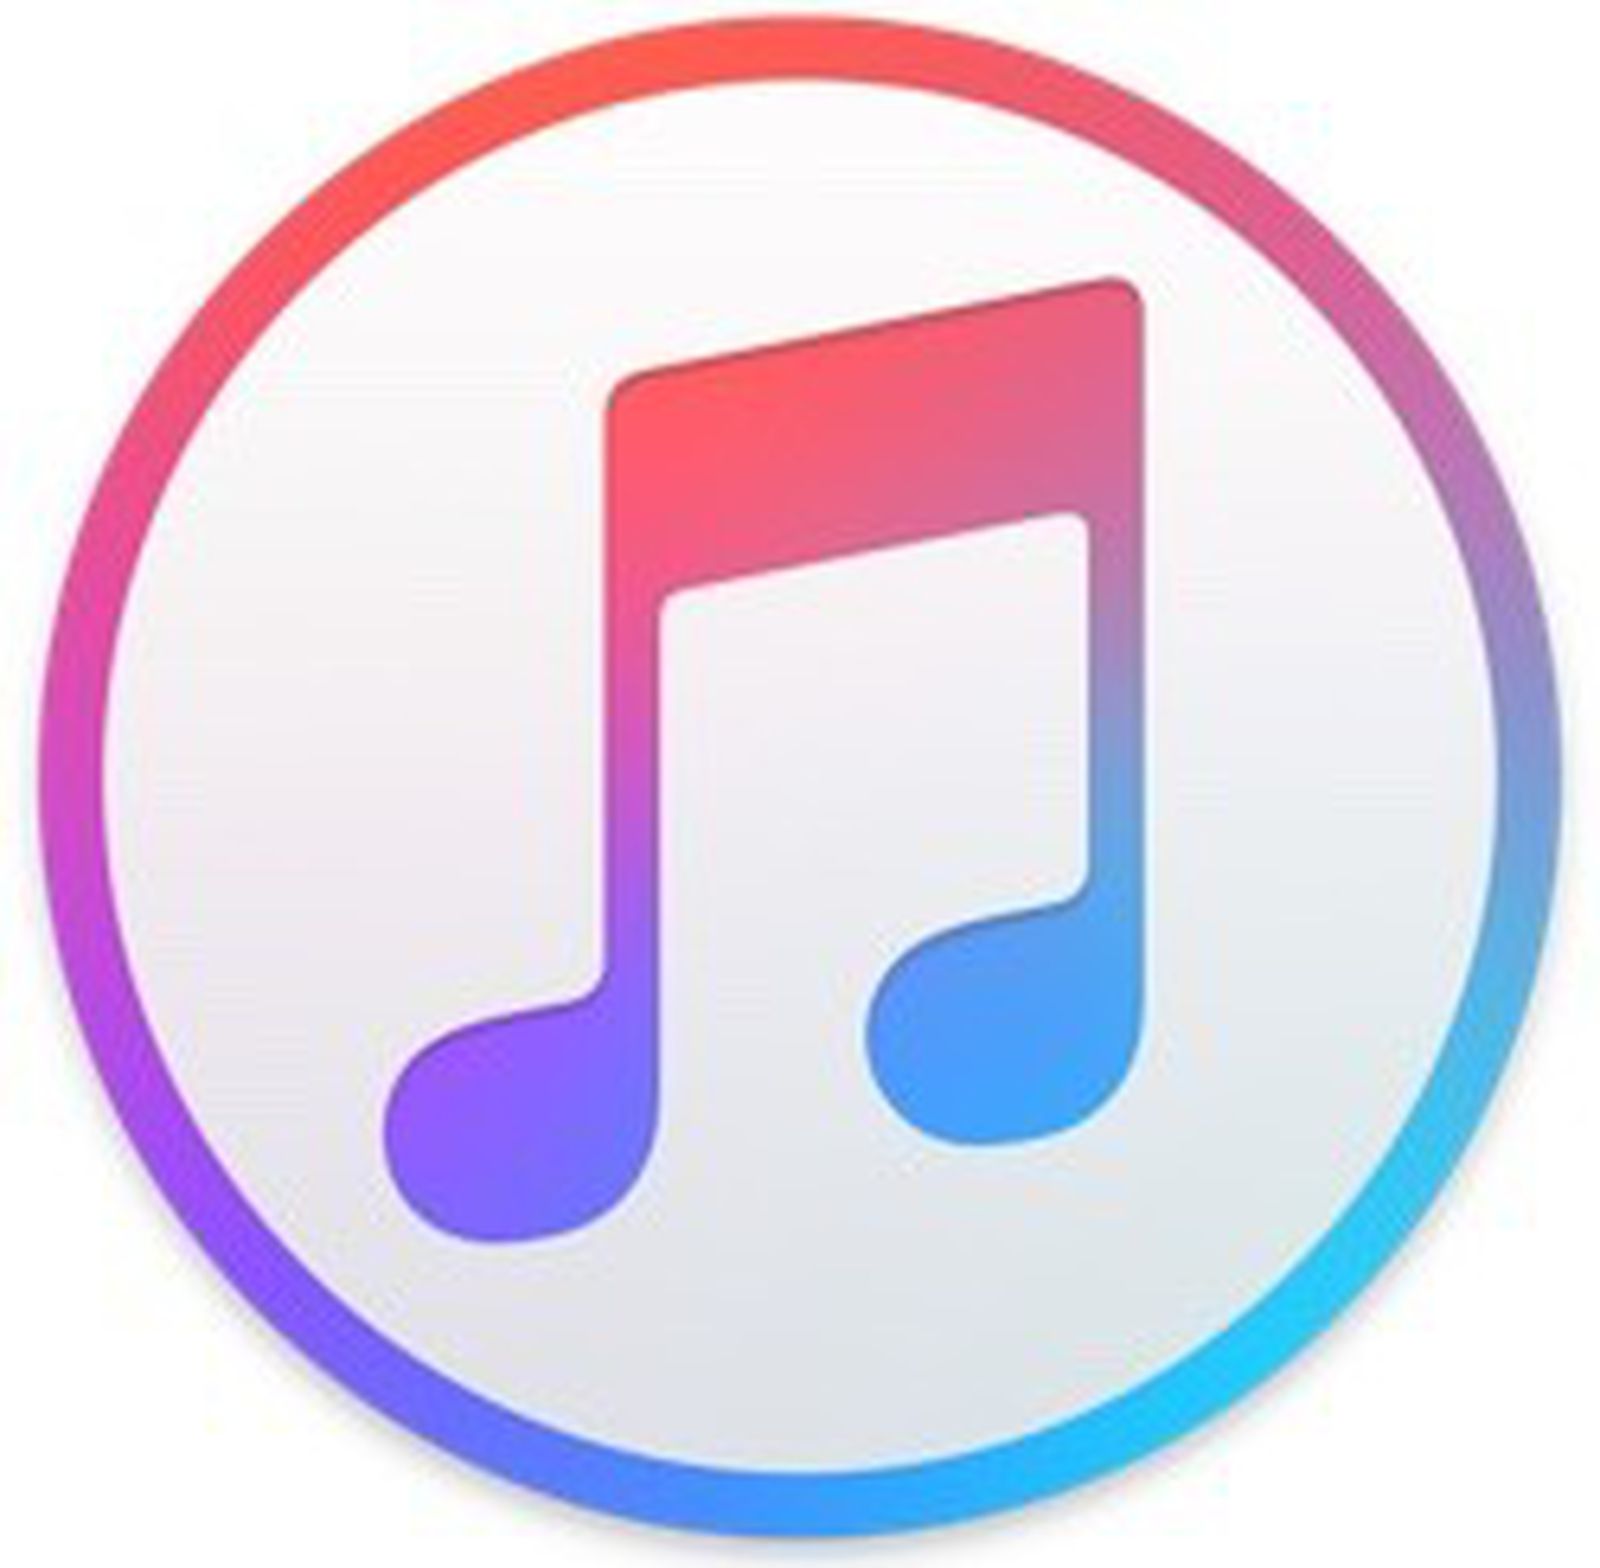 Apple Releases ITunes 12.5.1 With Revamped Apple Music Design.